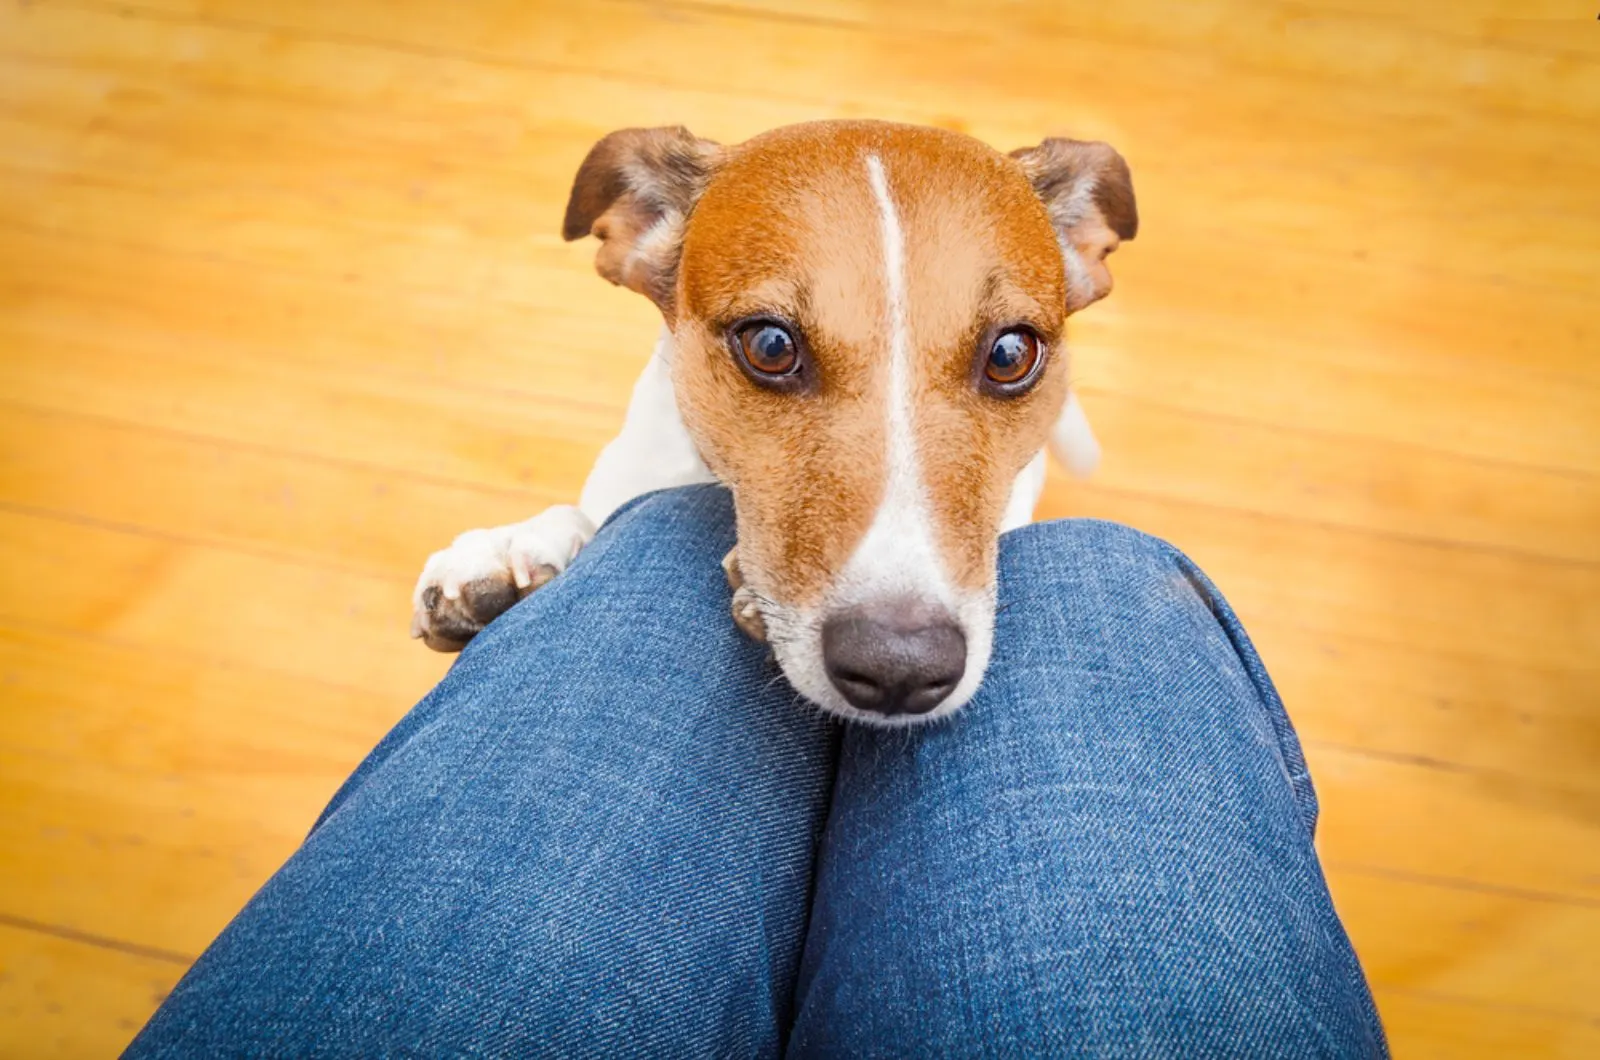 jack russell dog leaning head on owner's lap